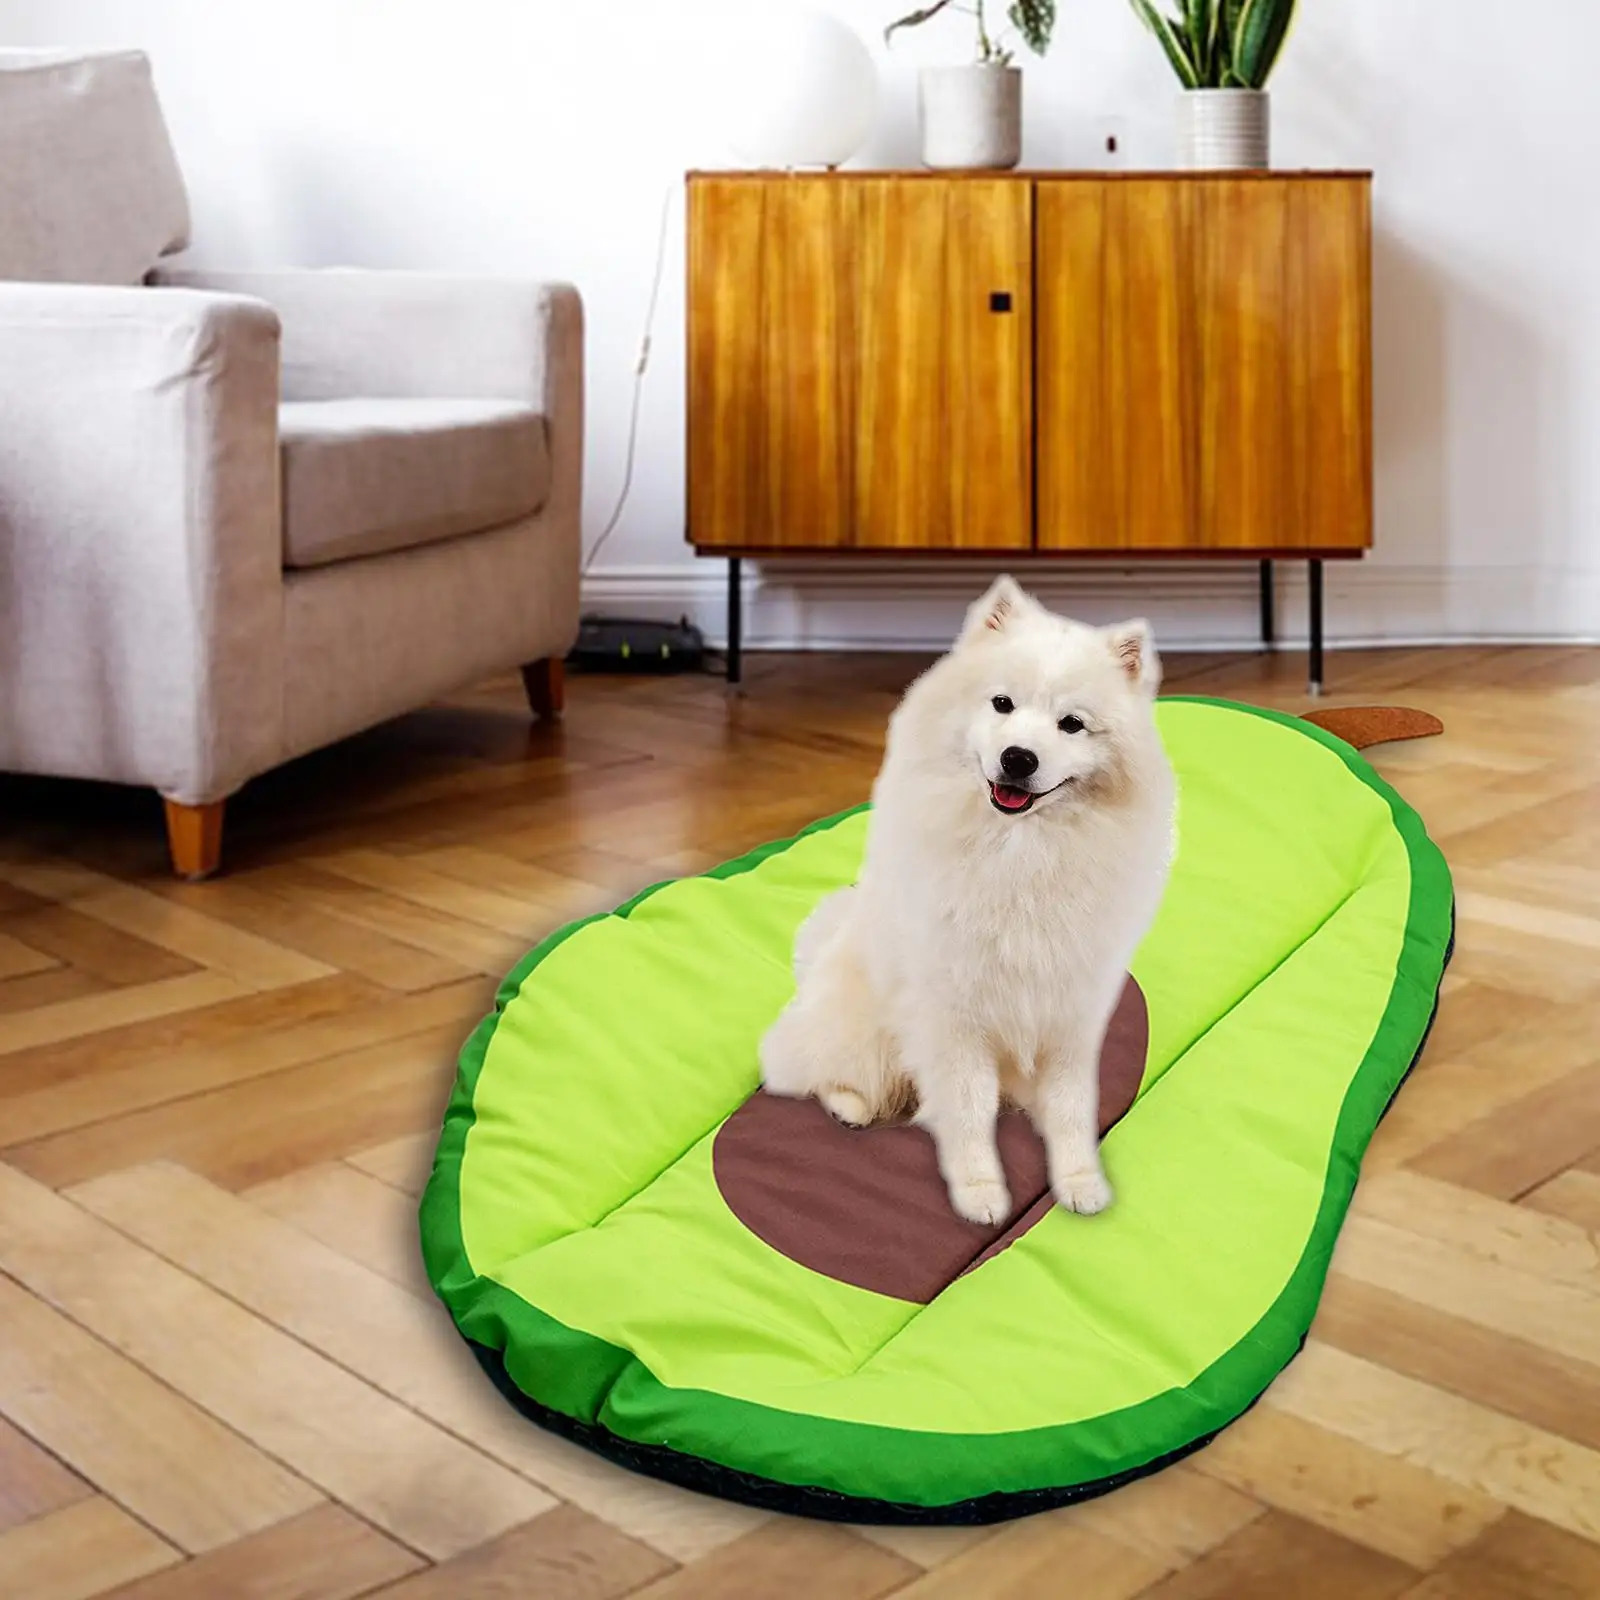 Pet Blanket Cat Bed Mat Dog Sleeping Pad Cushion Indoor Crate Pad Bedding Creative Winter Nest for Kitten Small Dogs Home Decor